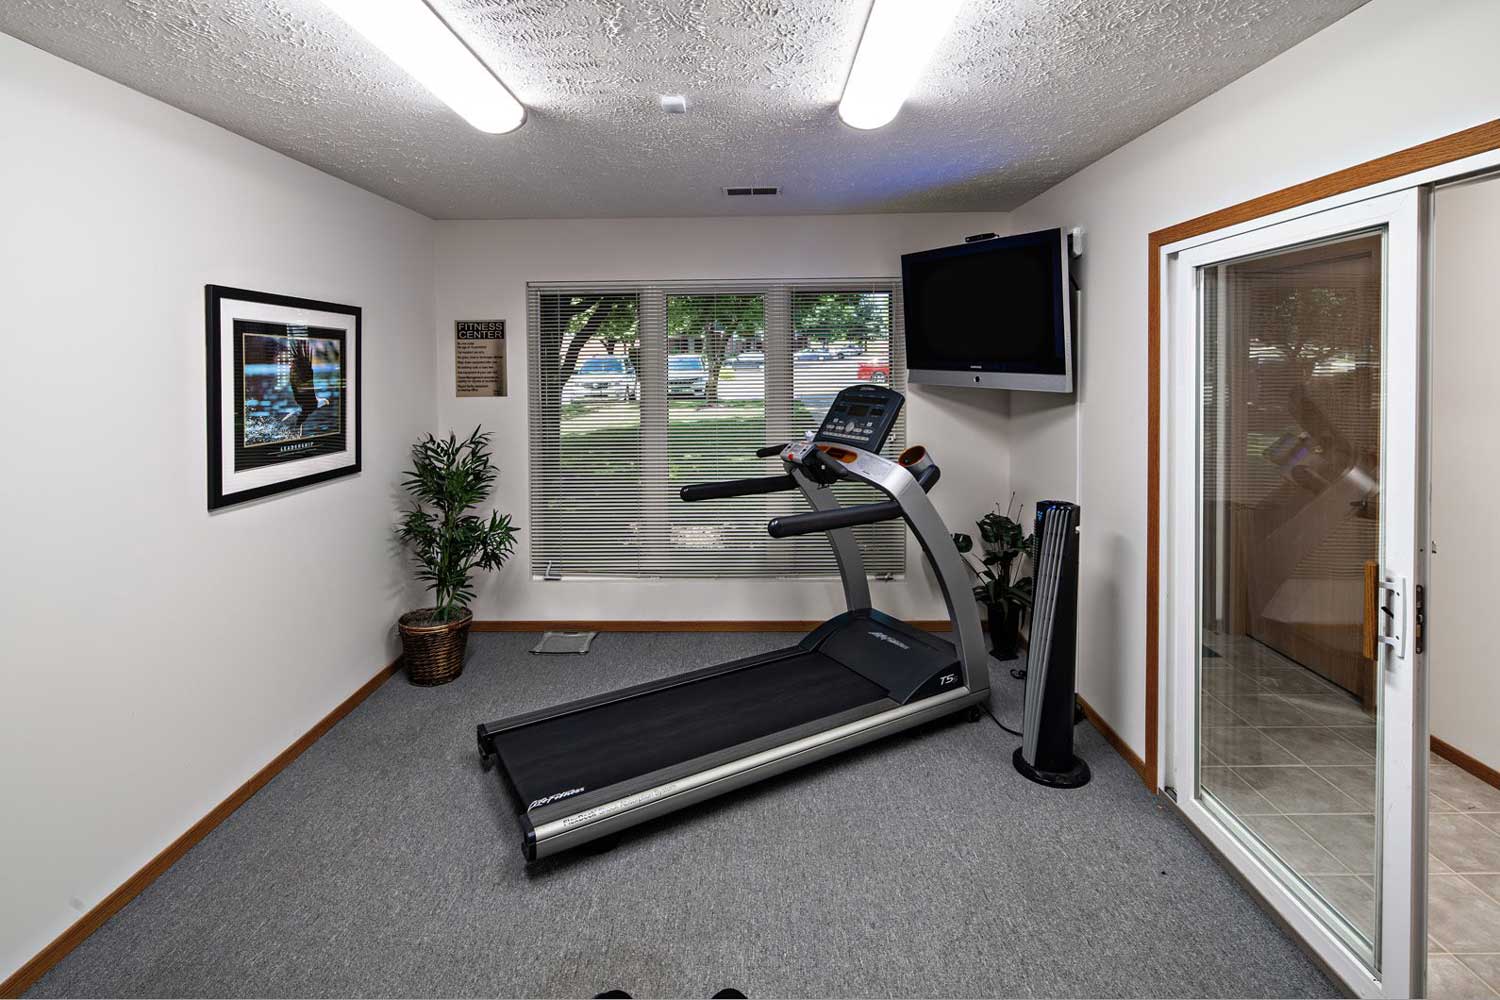 Fitness Center at Highland Meadows Apartments in Bellevue, NE